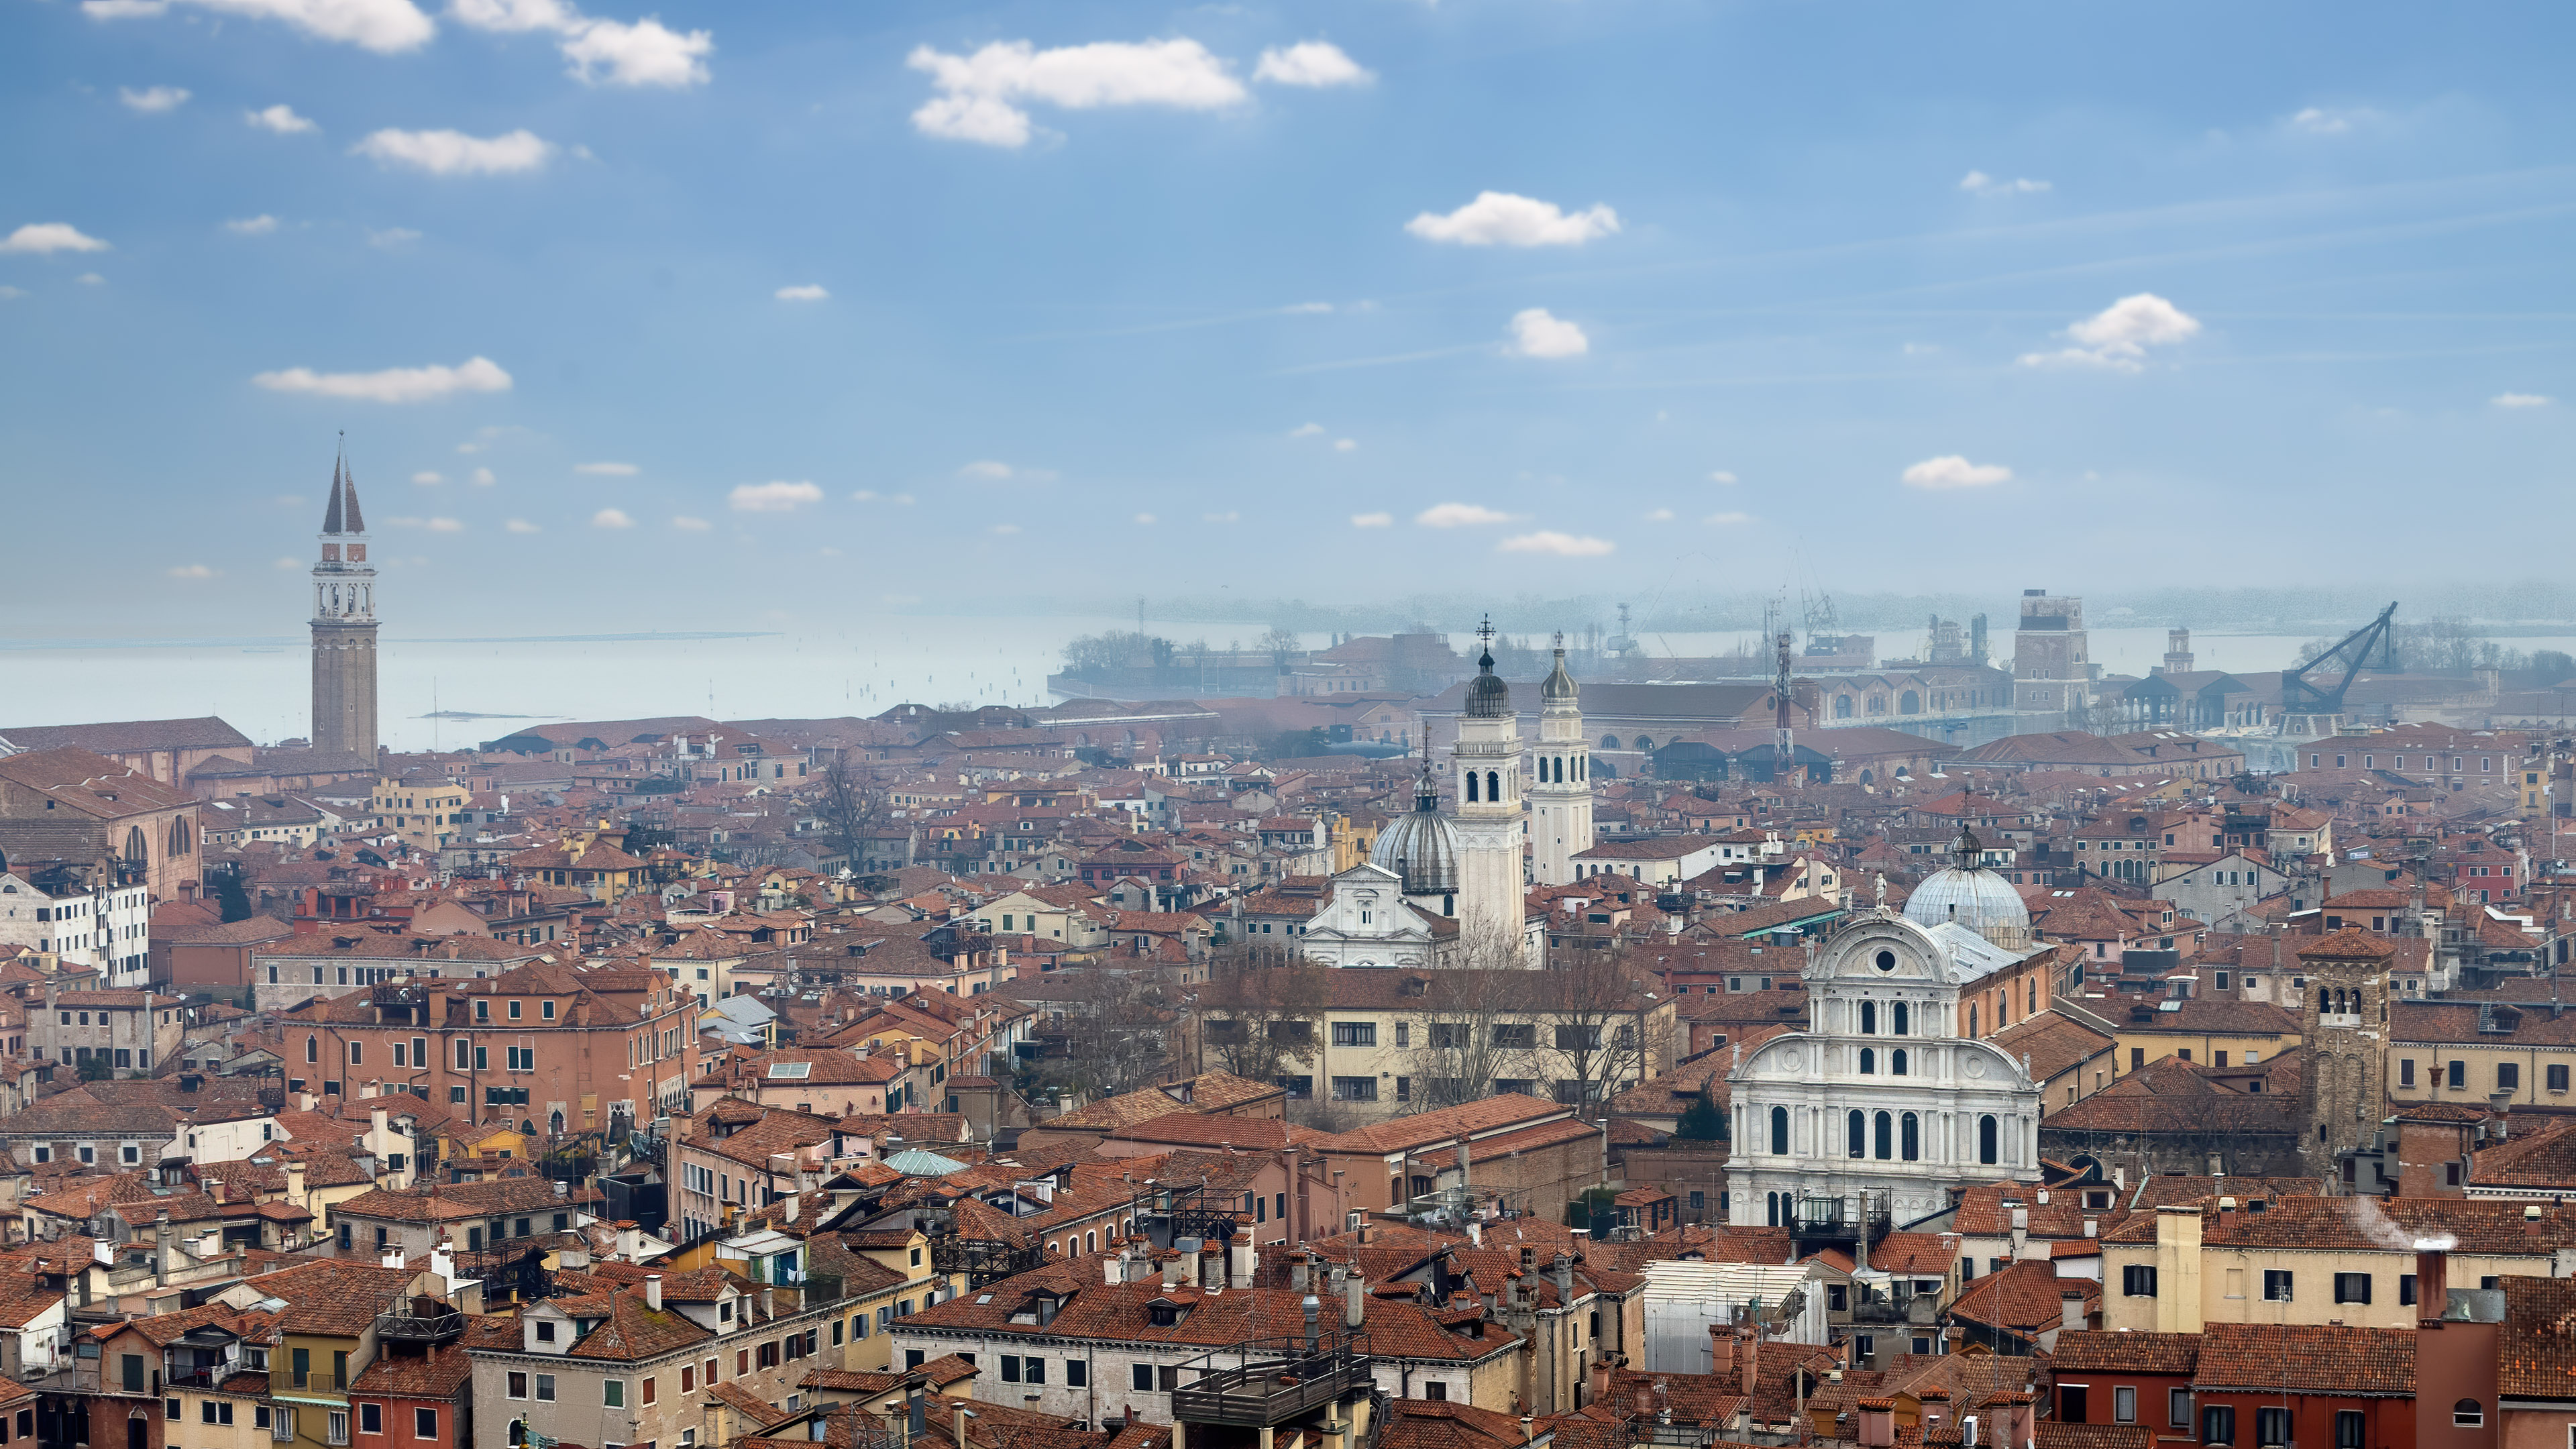 Enjoy the breathtaking view of Venice's skyline with this stunning cityscape wallpaper. Featuring the city's iconic landmarks and canals, this wallpaper is perfect for those who love the charm and beauty of Venice.